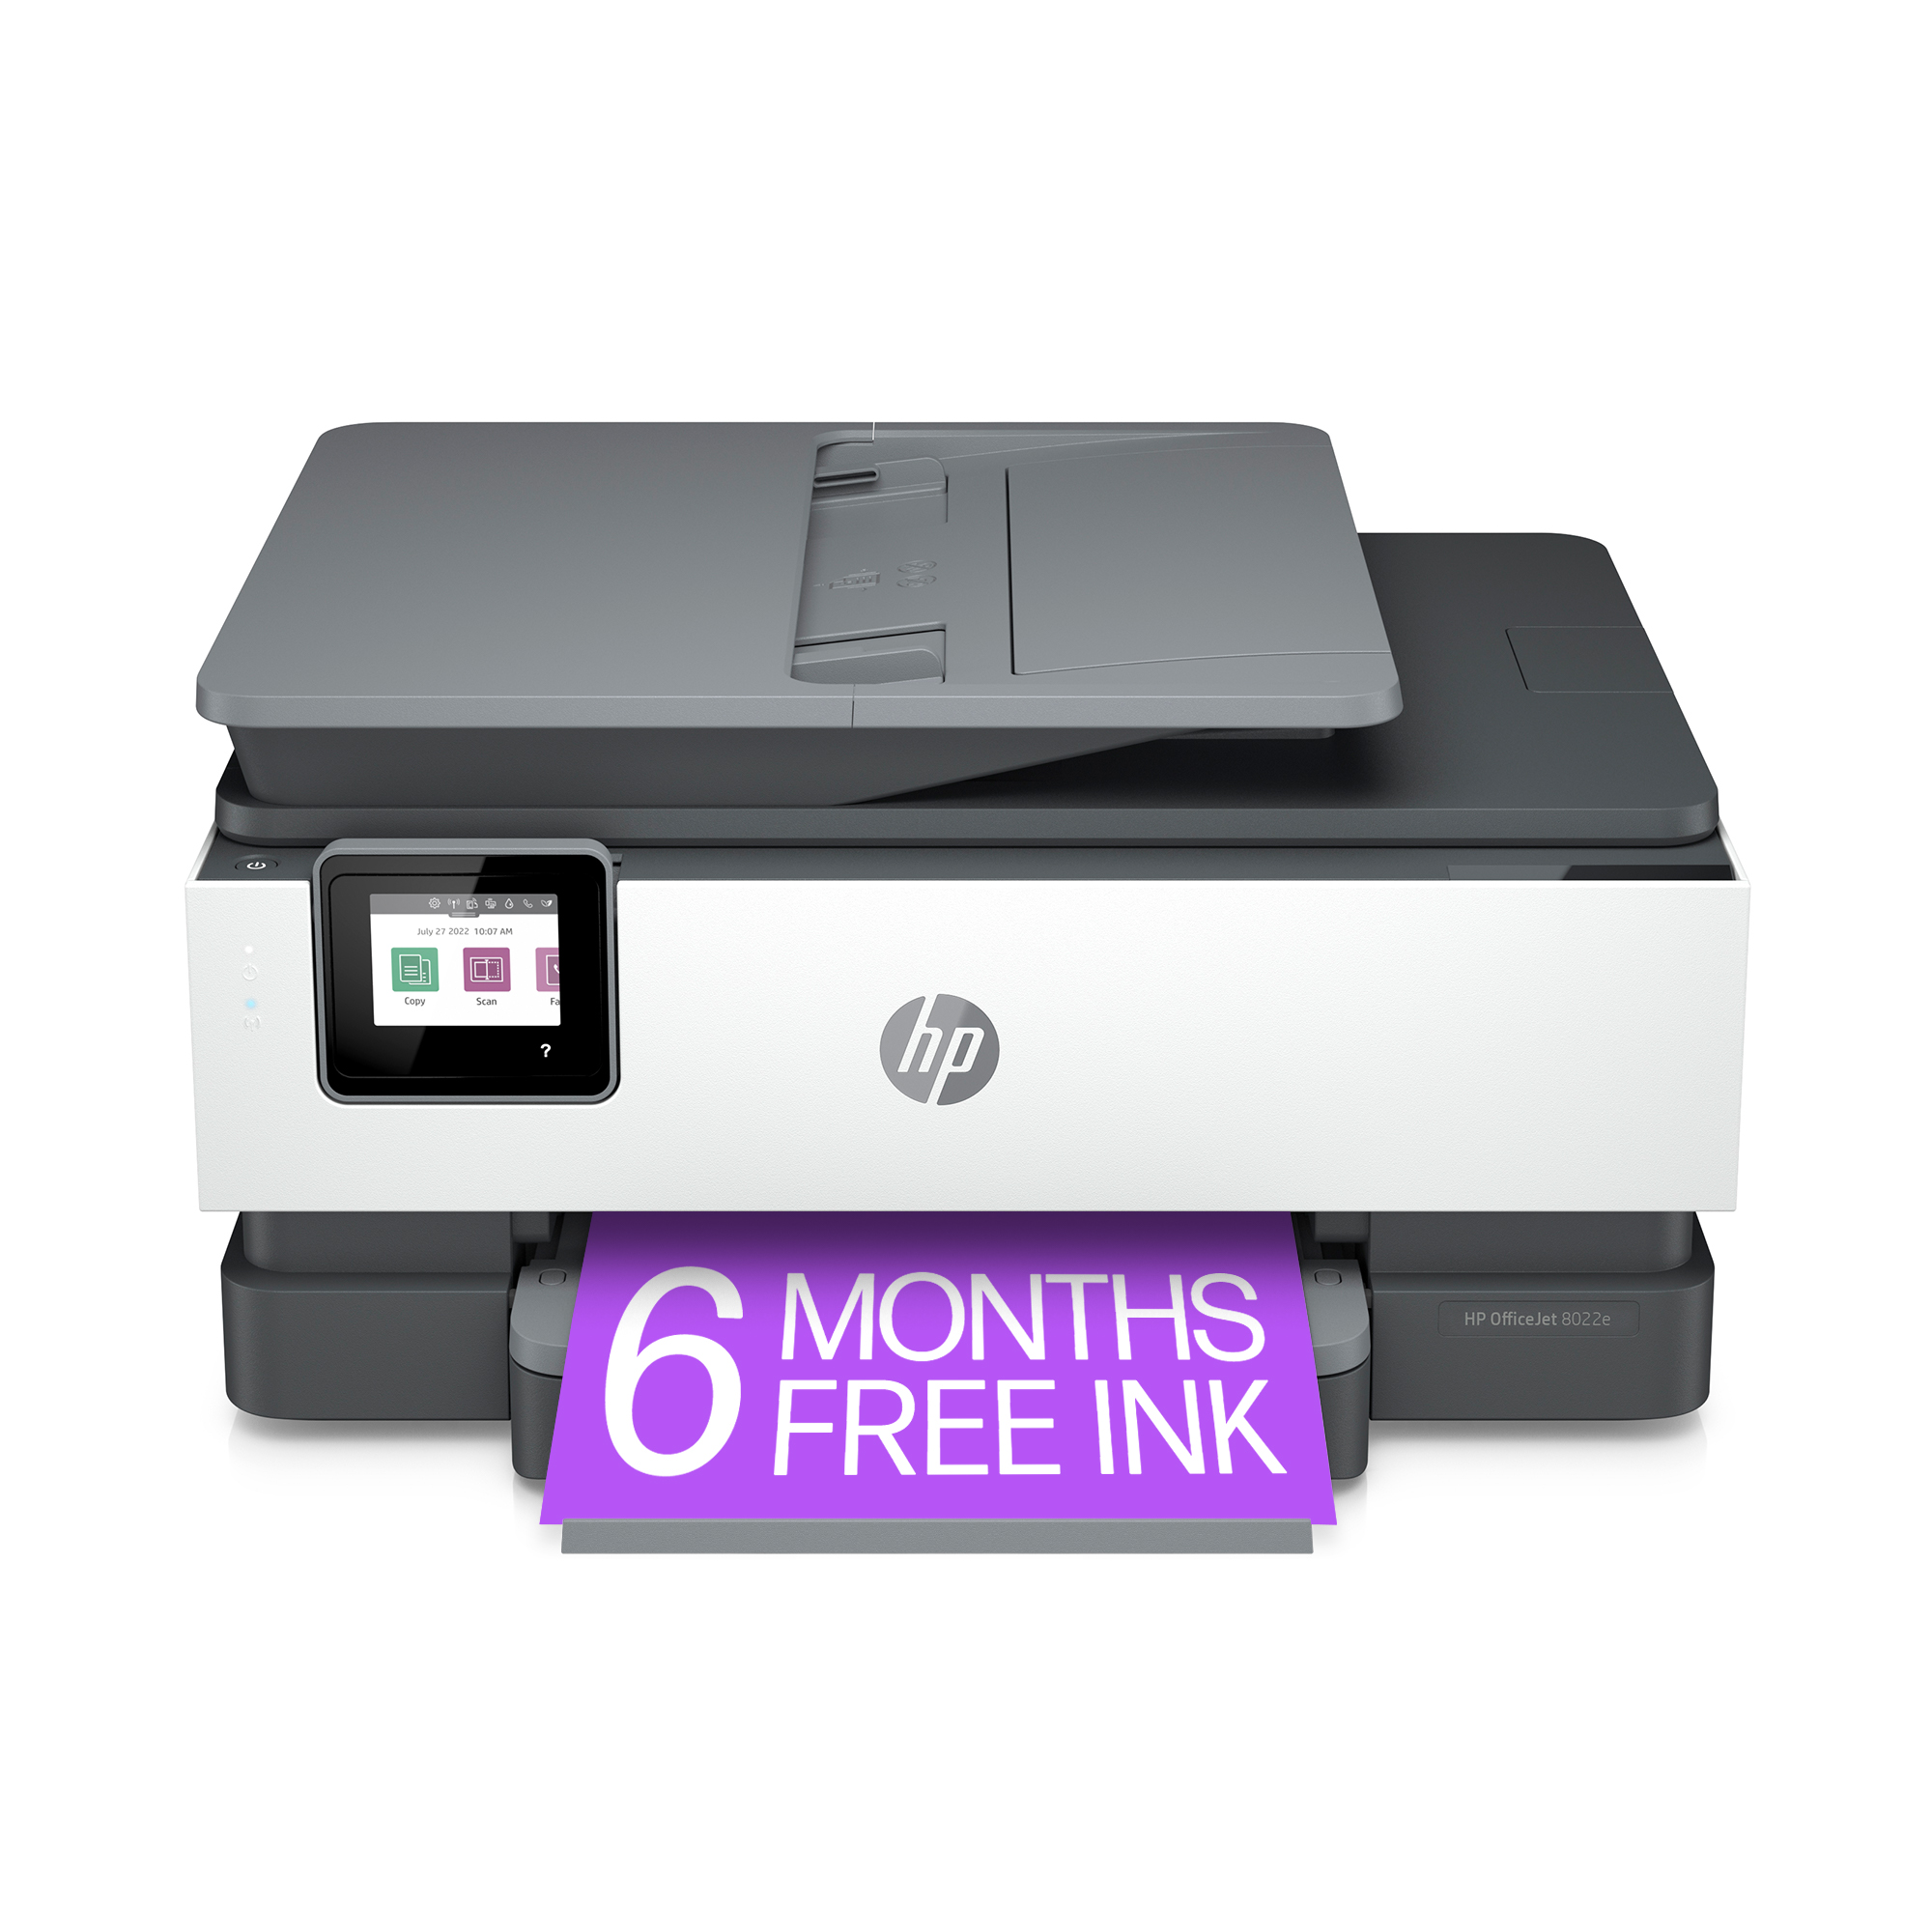 How To Scan, Print, Copy With HP OfficeJet Pro 8022 Wireless Printer ? 